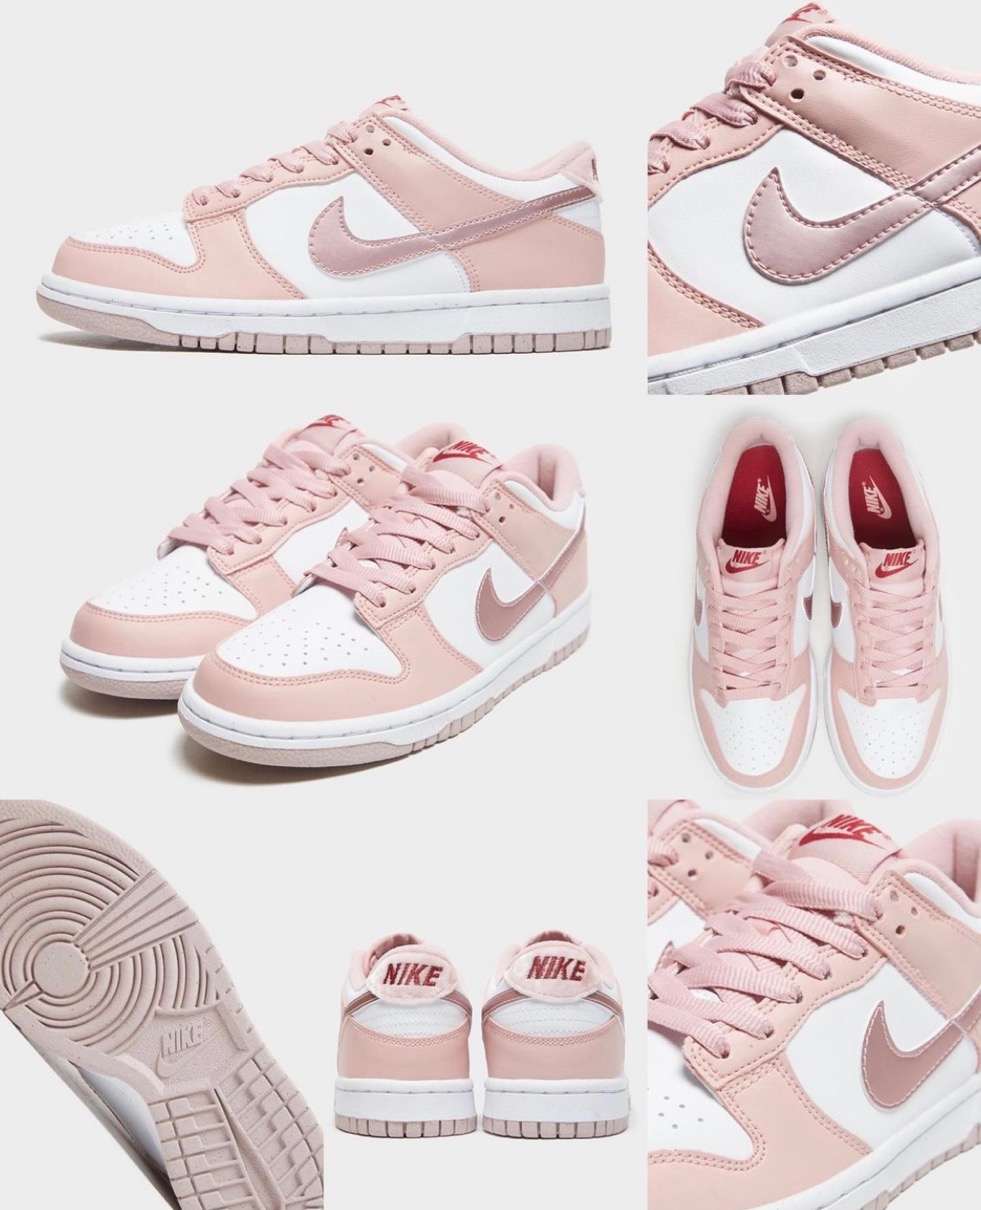 Nike】Dunk Low GS “Pink Velvet”が10月1日に発売予定 | UP TO DATE